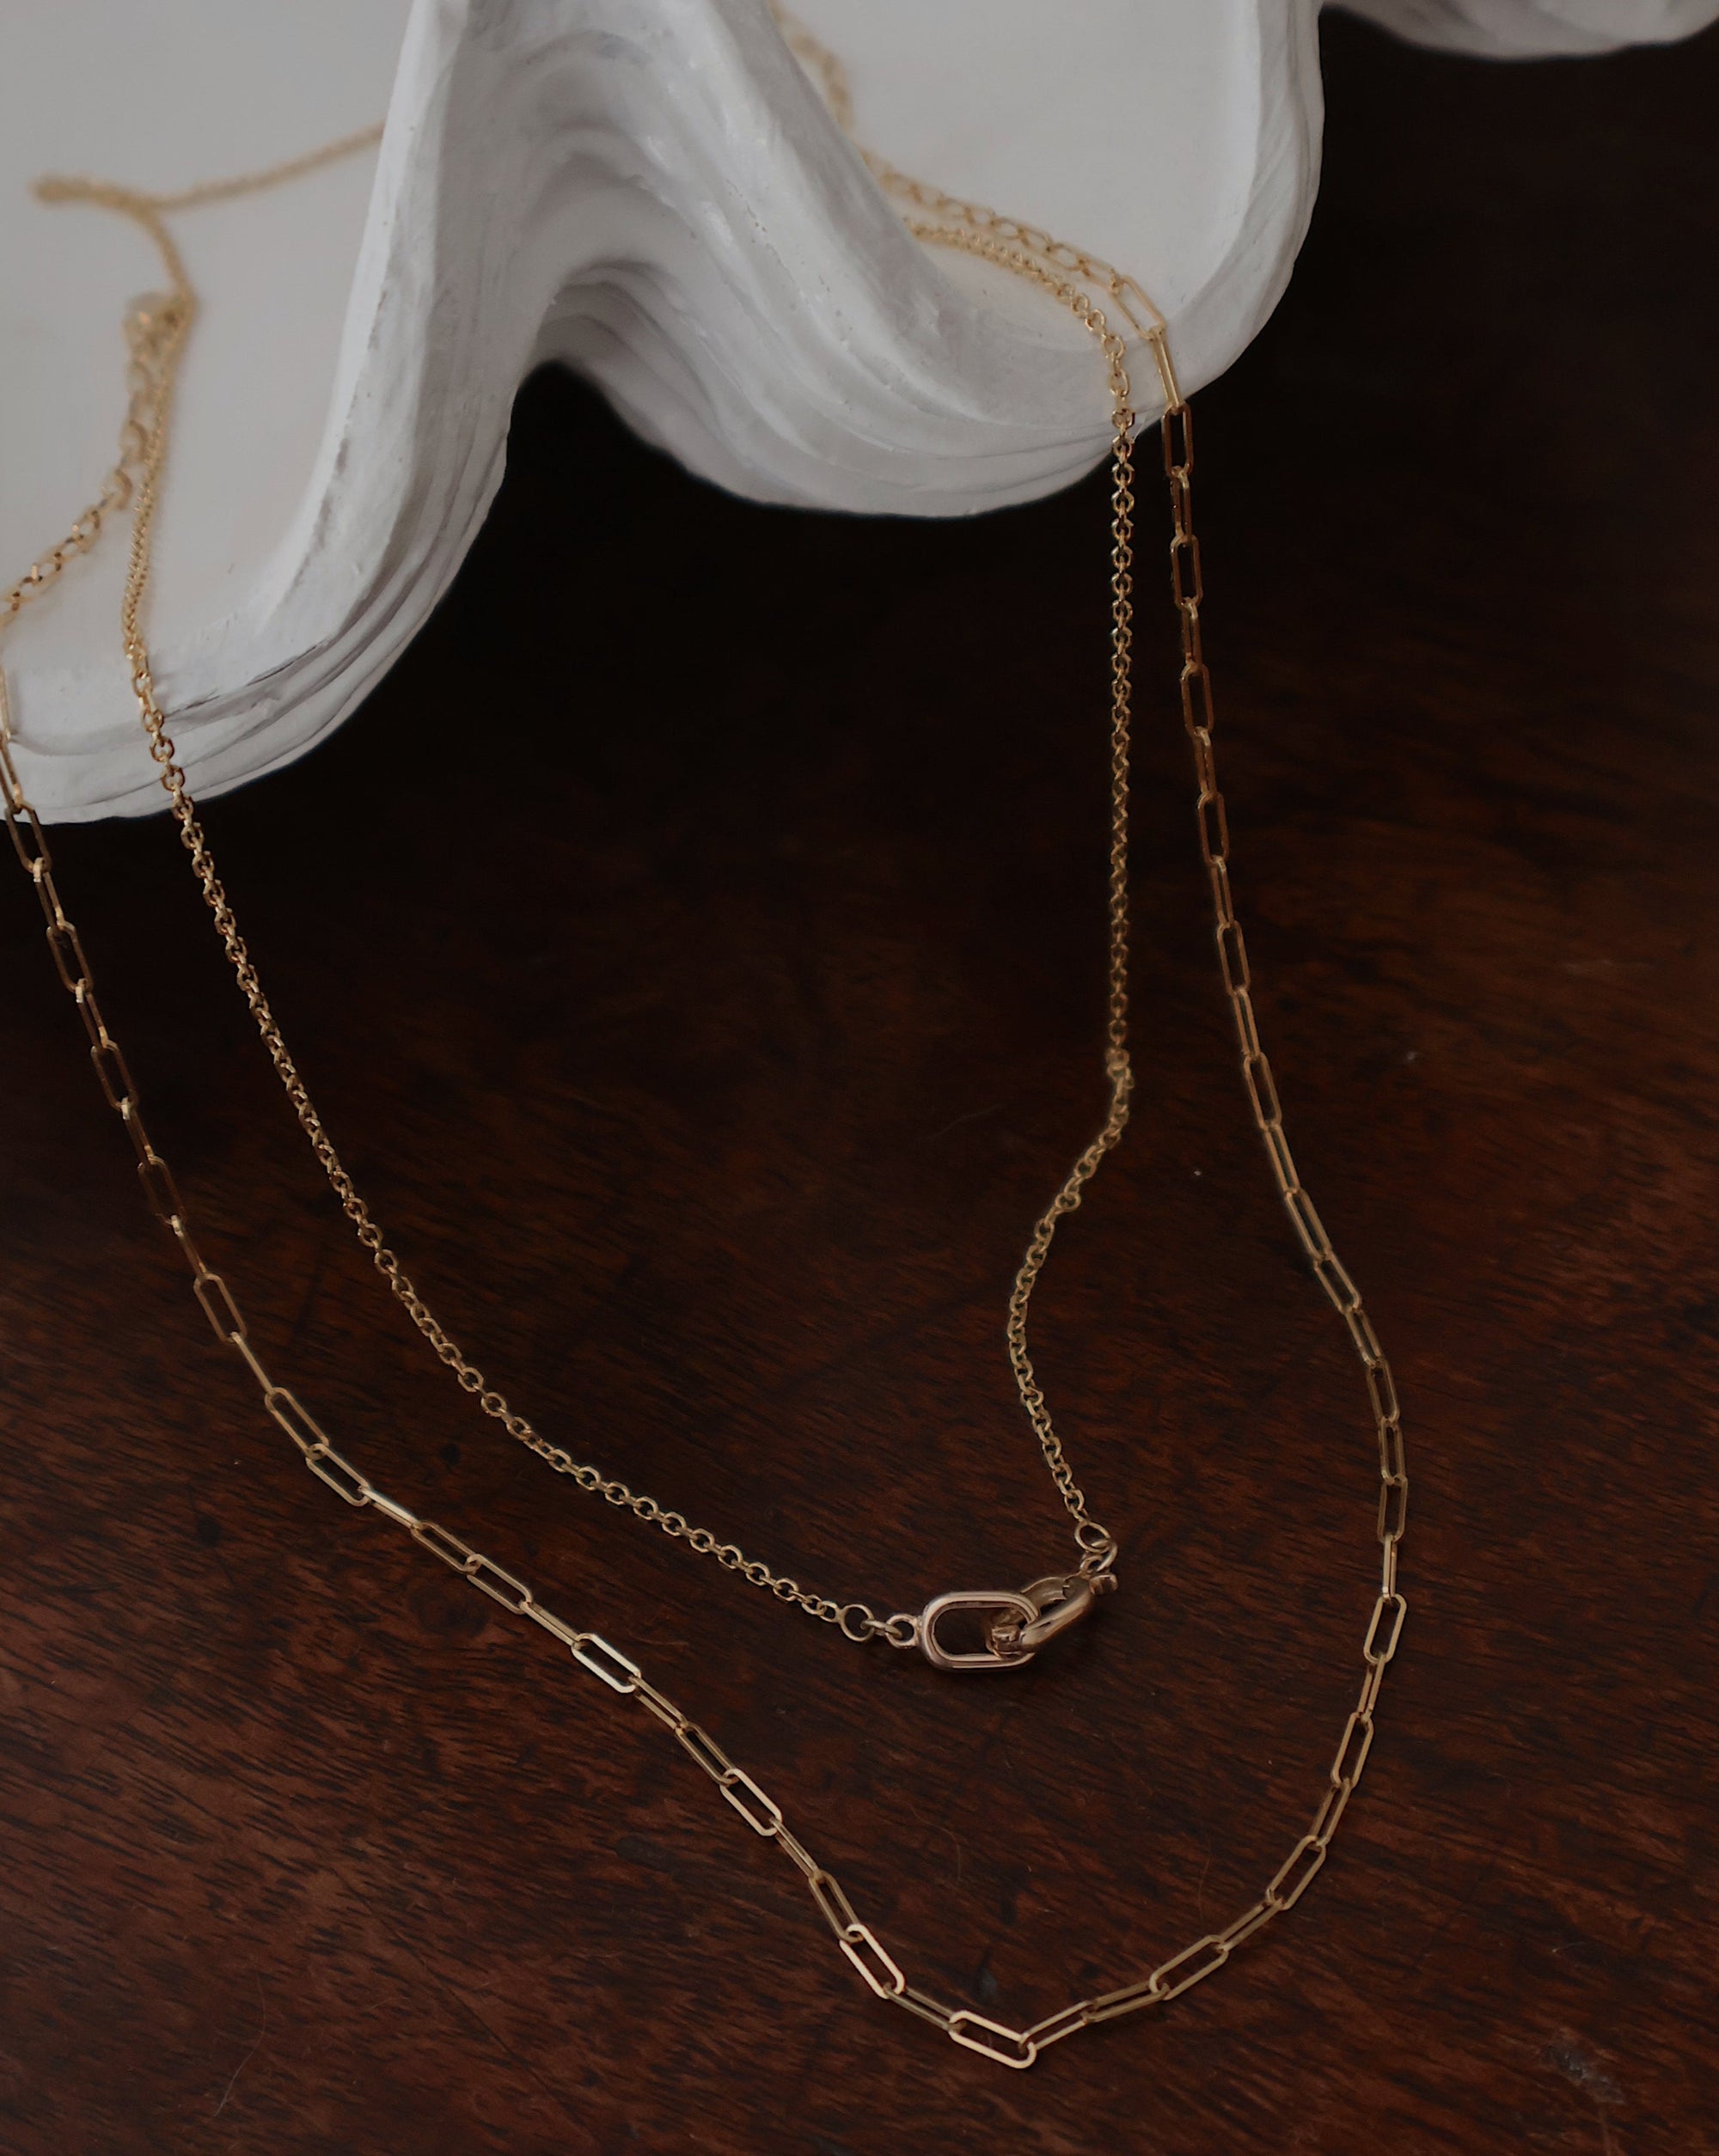 two 14 karat gold paperclip necklaces draped on a shell with dark wood tabletop